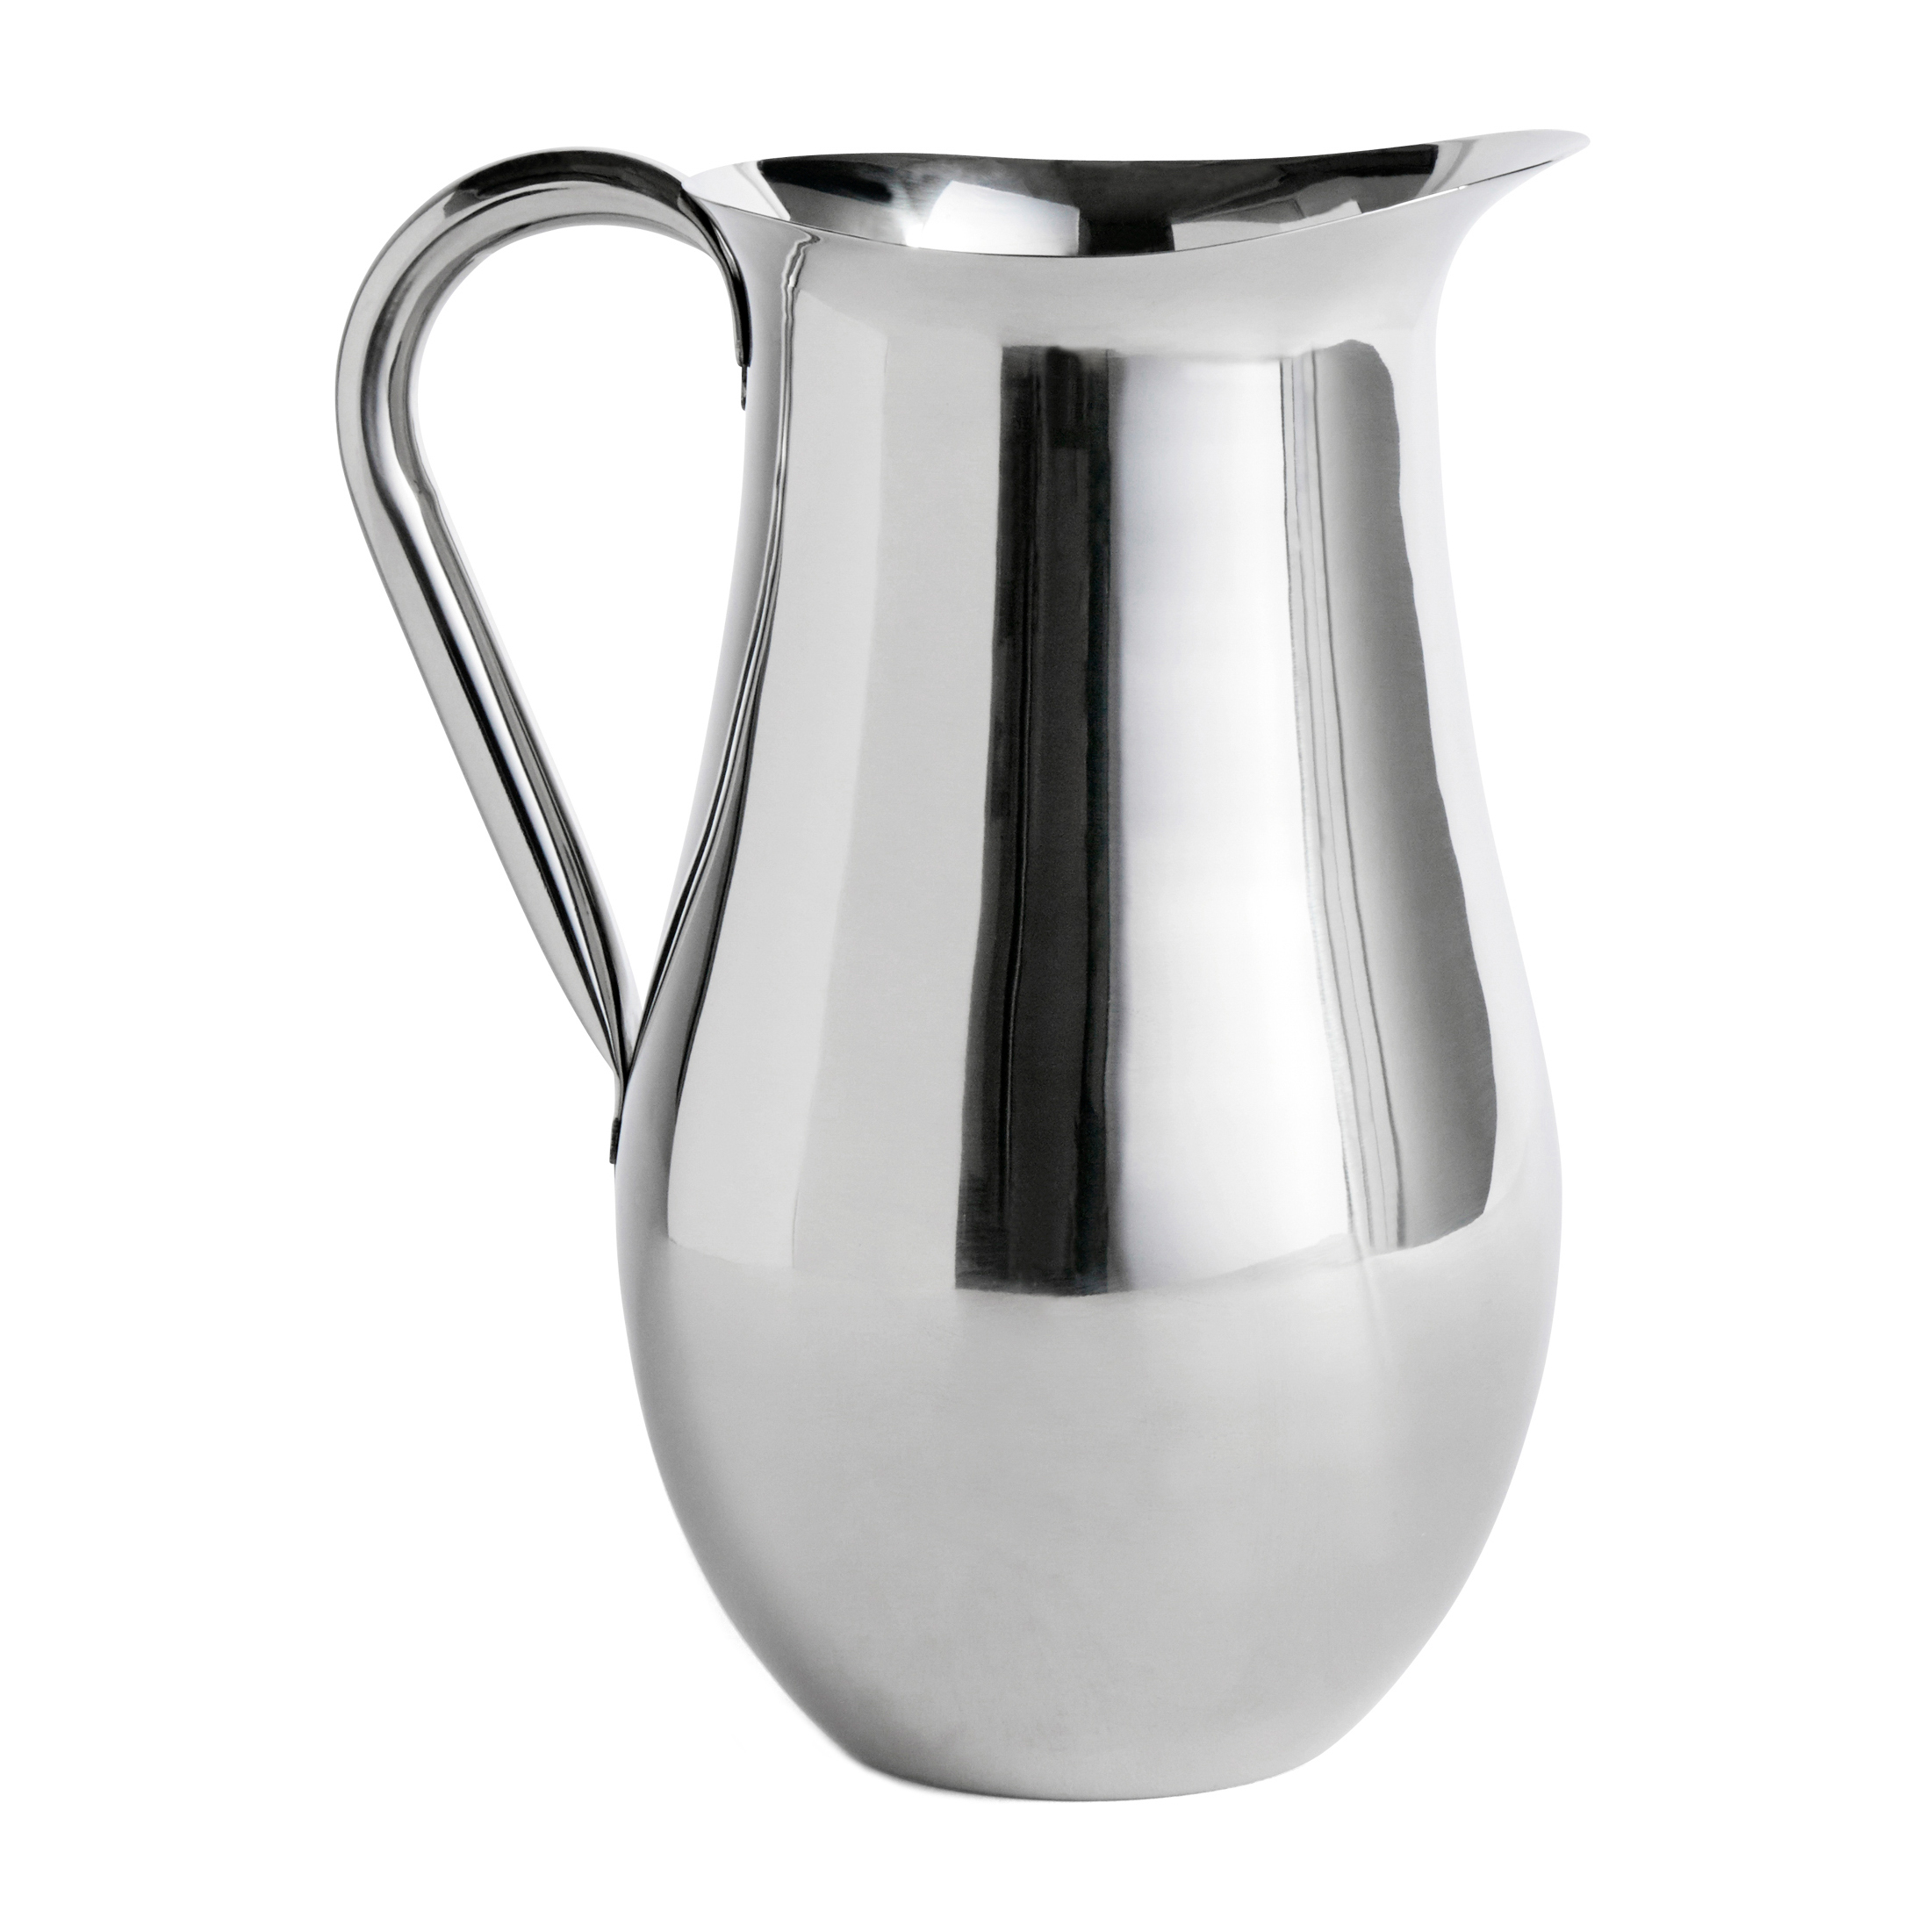 https://www.nordicnest.com/assets/blobs/hay-indian-steel-pitcher-no-2-pot-325-l-stainless-steel/504552-01_1_ProductImageMain-8531c81128.jpg